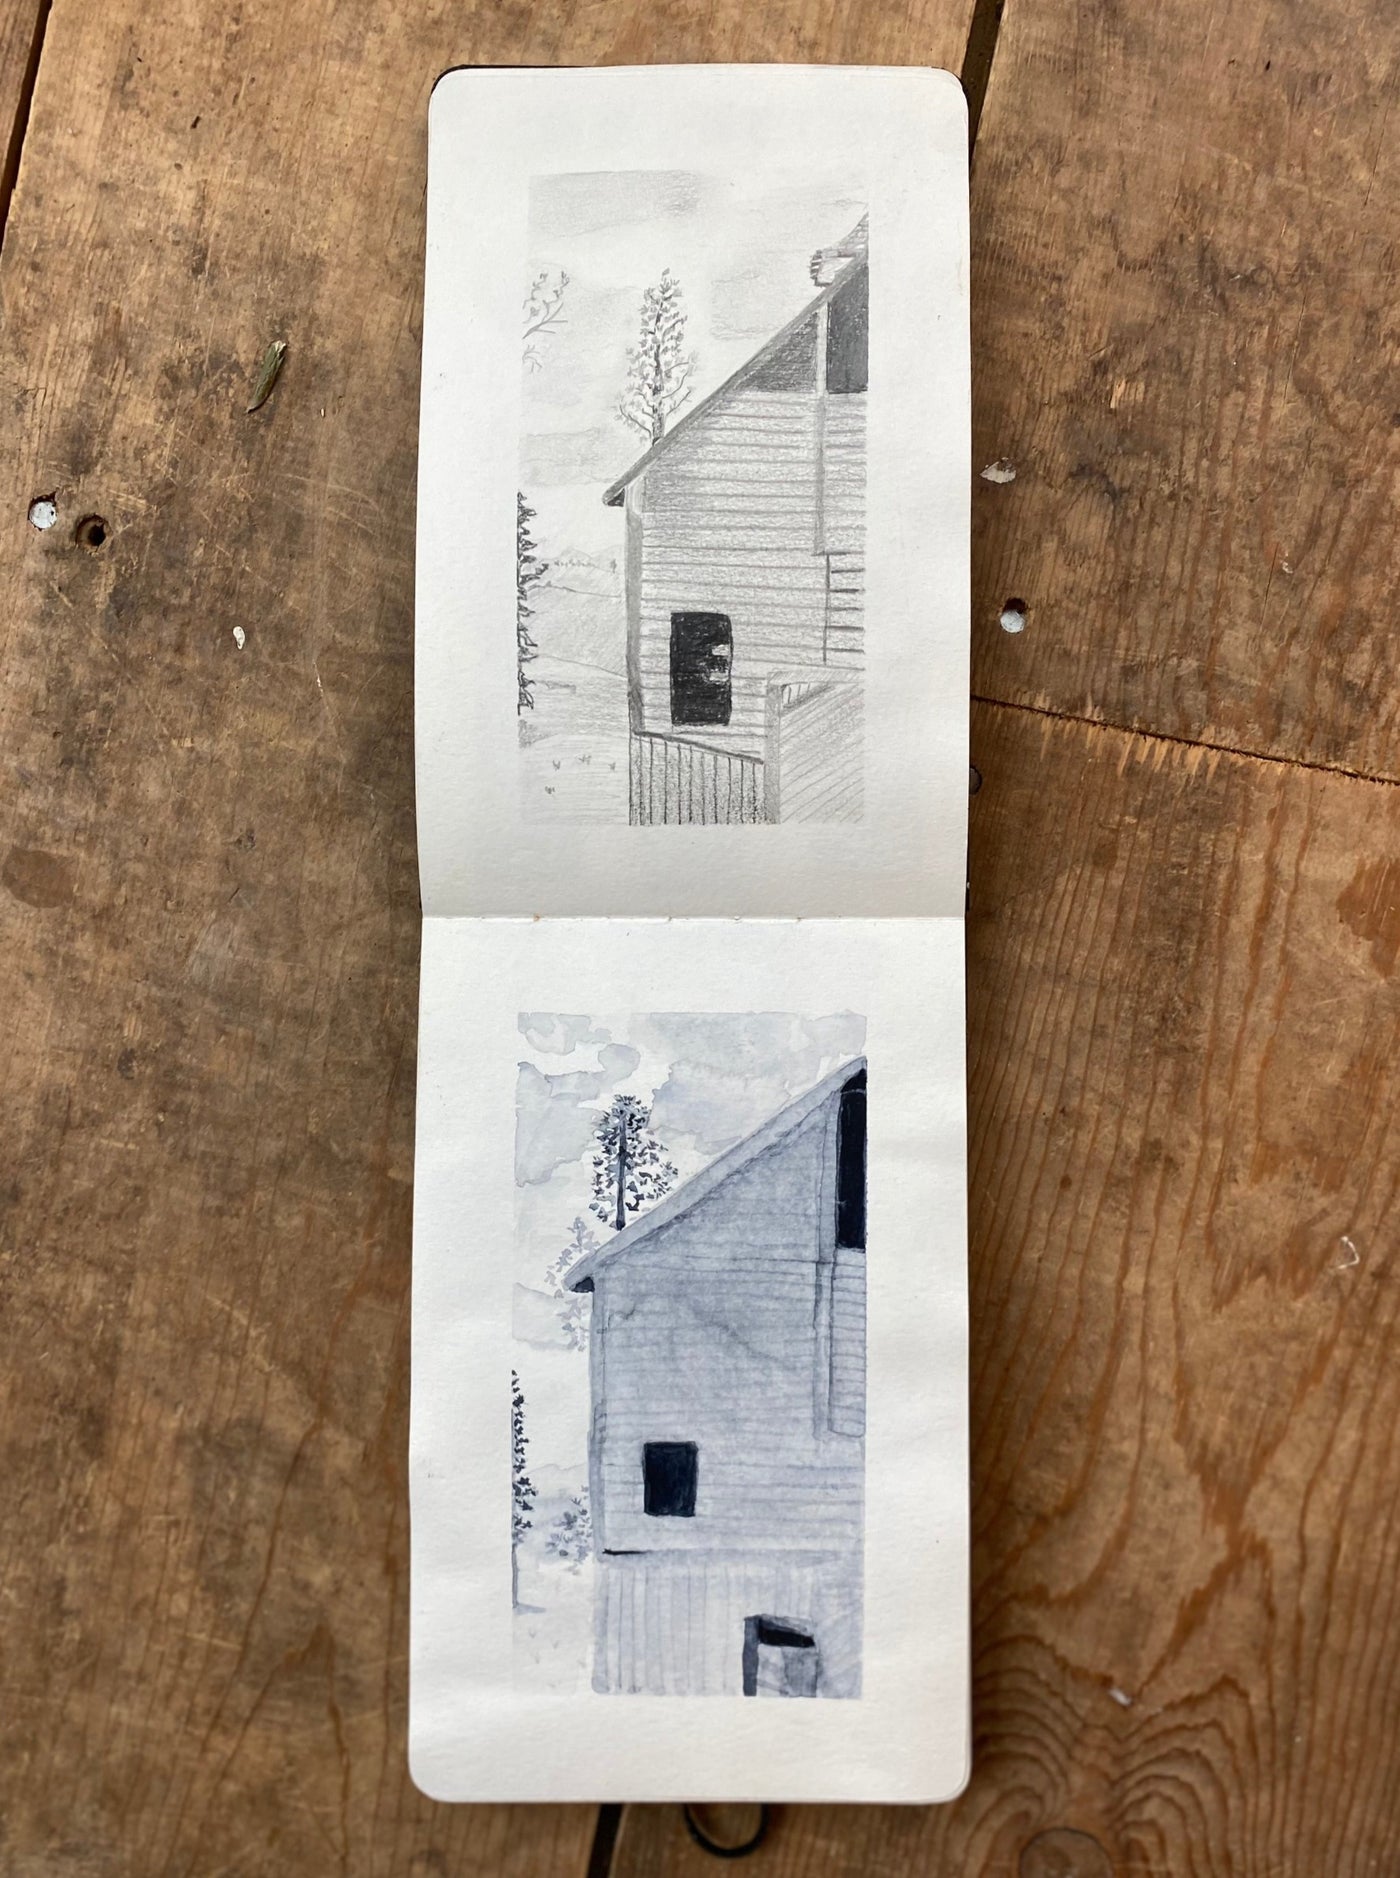 Barn sketches in artist Kate Poole's landscape journal